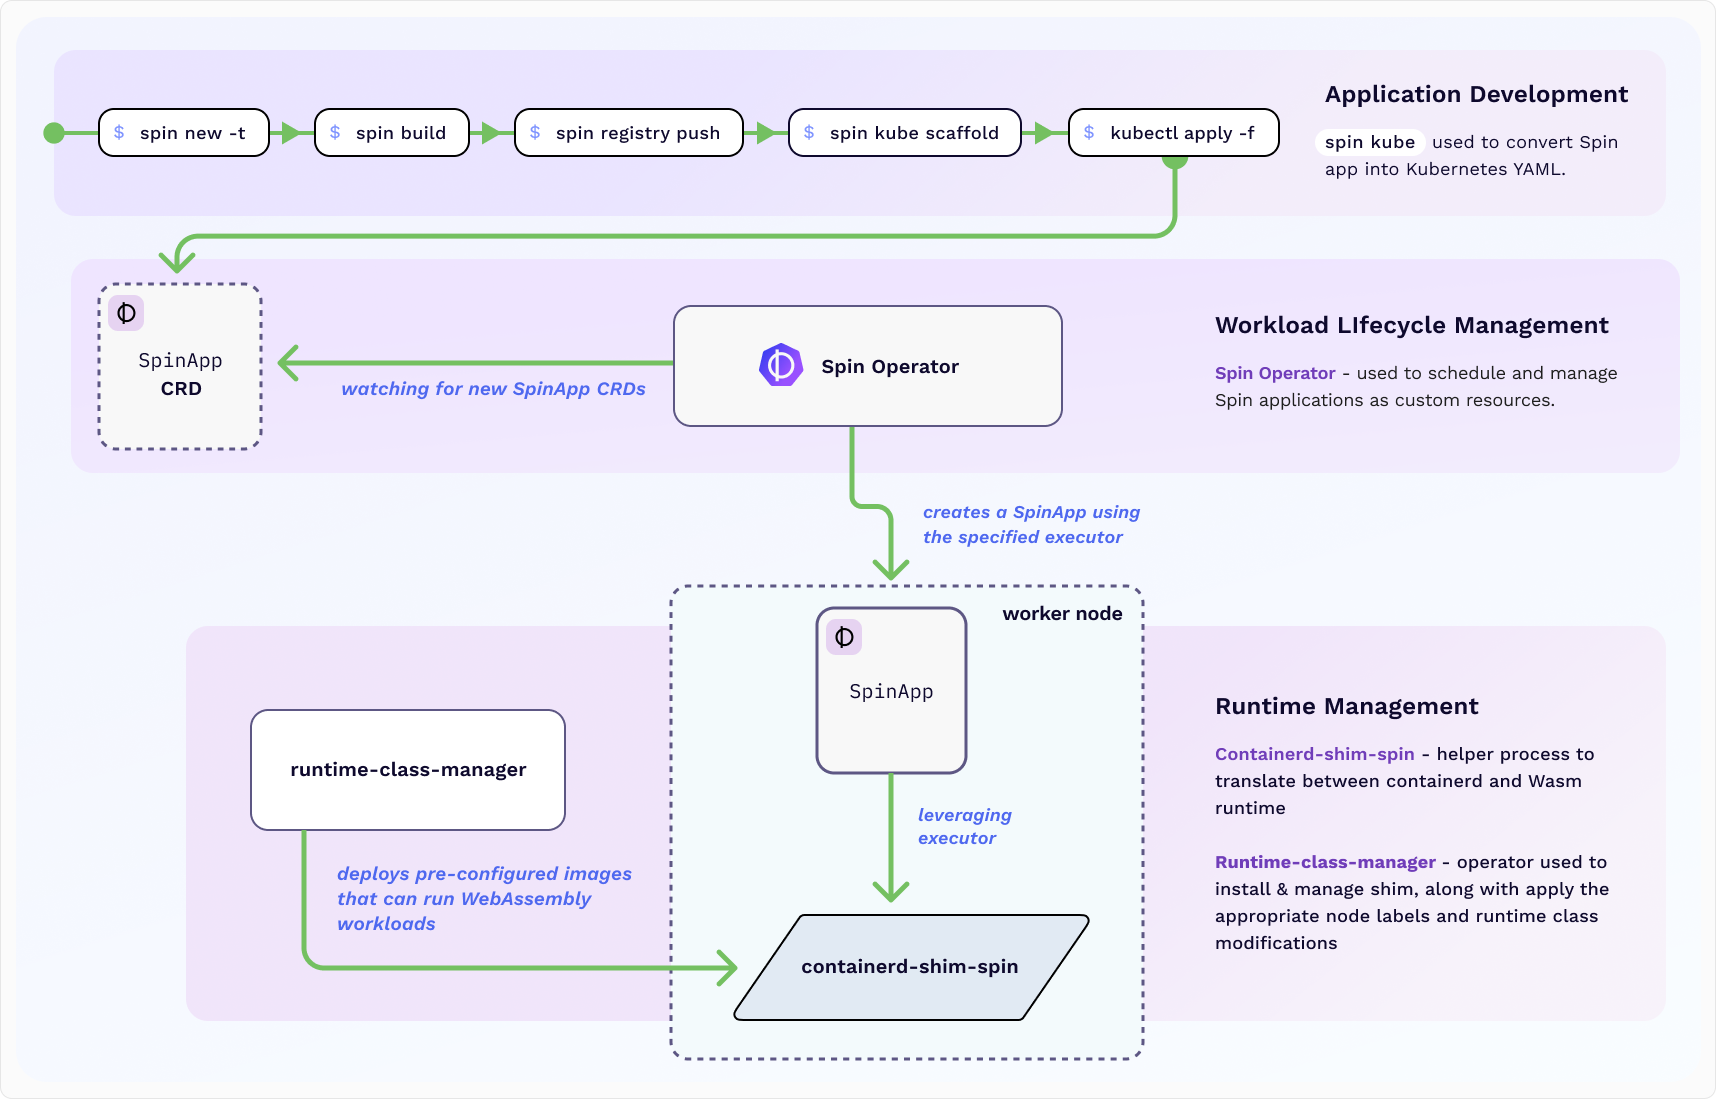 SpinKube Project Overview Diagram